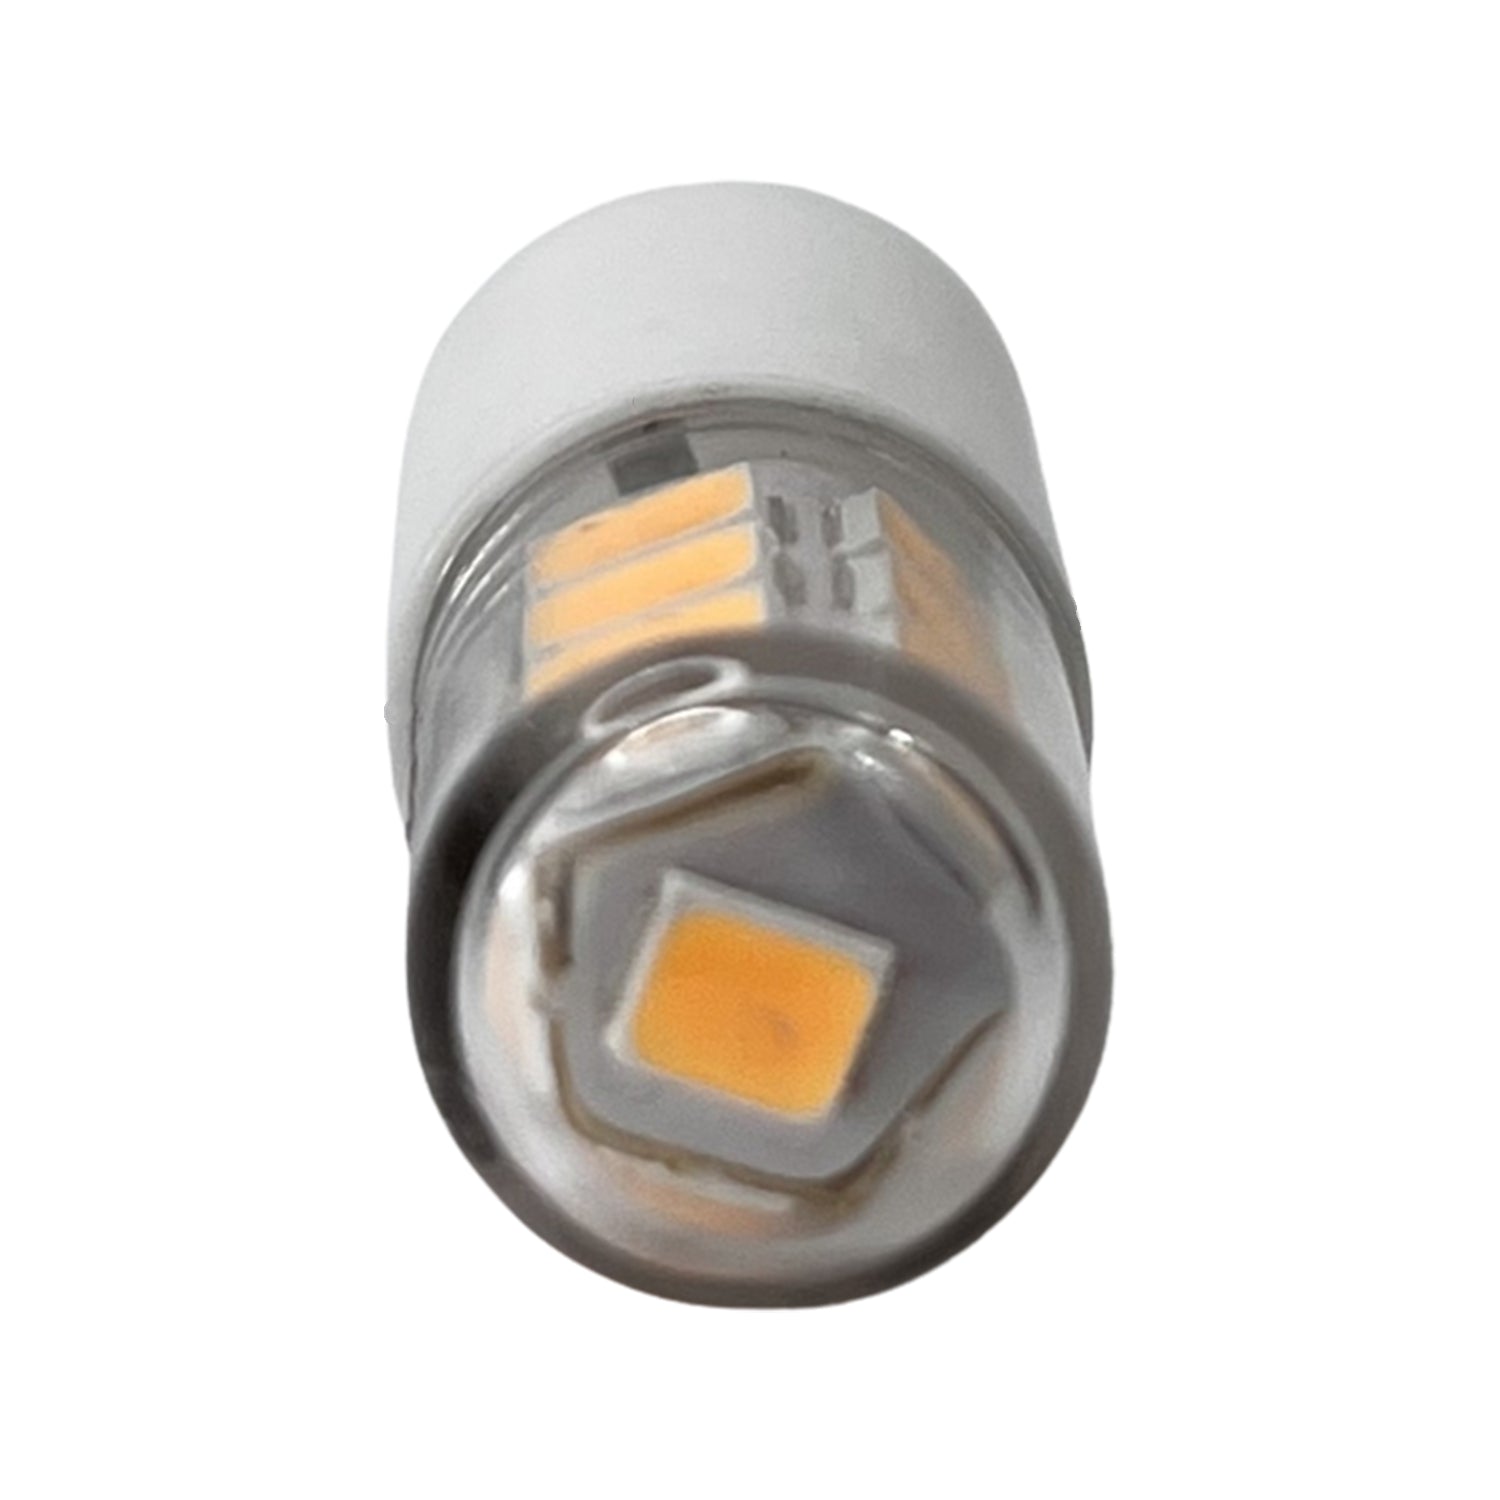 G4 2W SMD LED Dimmable Light Bulb